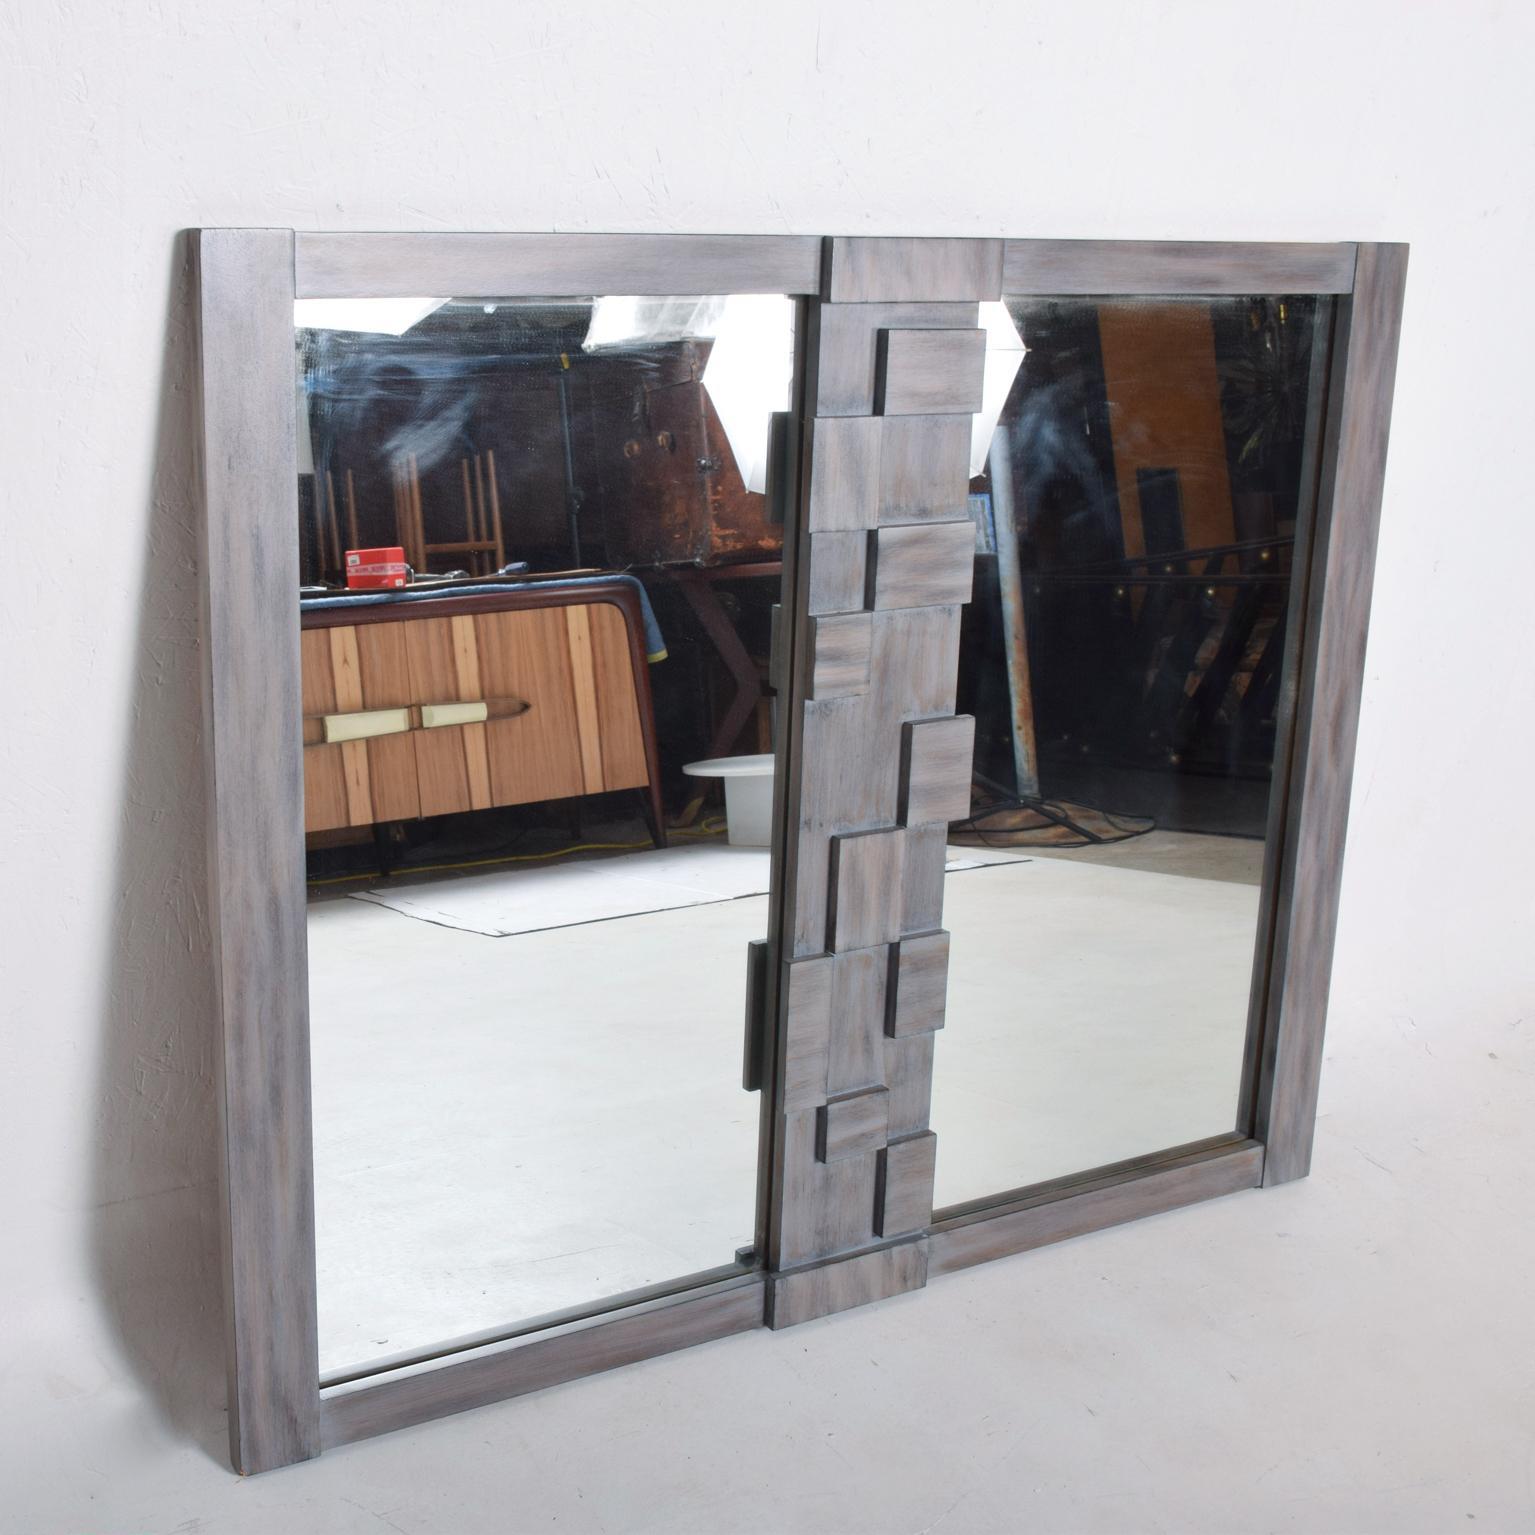 For your consideration, a Mid-Century Modernist Brutalist walnut mirror by Lane, The USA, circa the 1970s. Walnut wood with mirror. Dimensions: 51 1/2